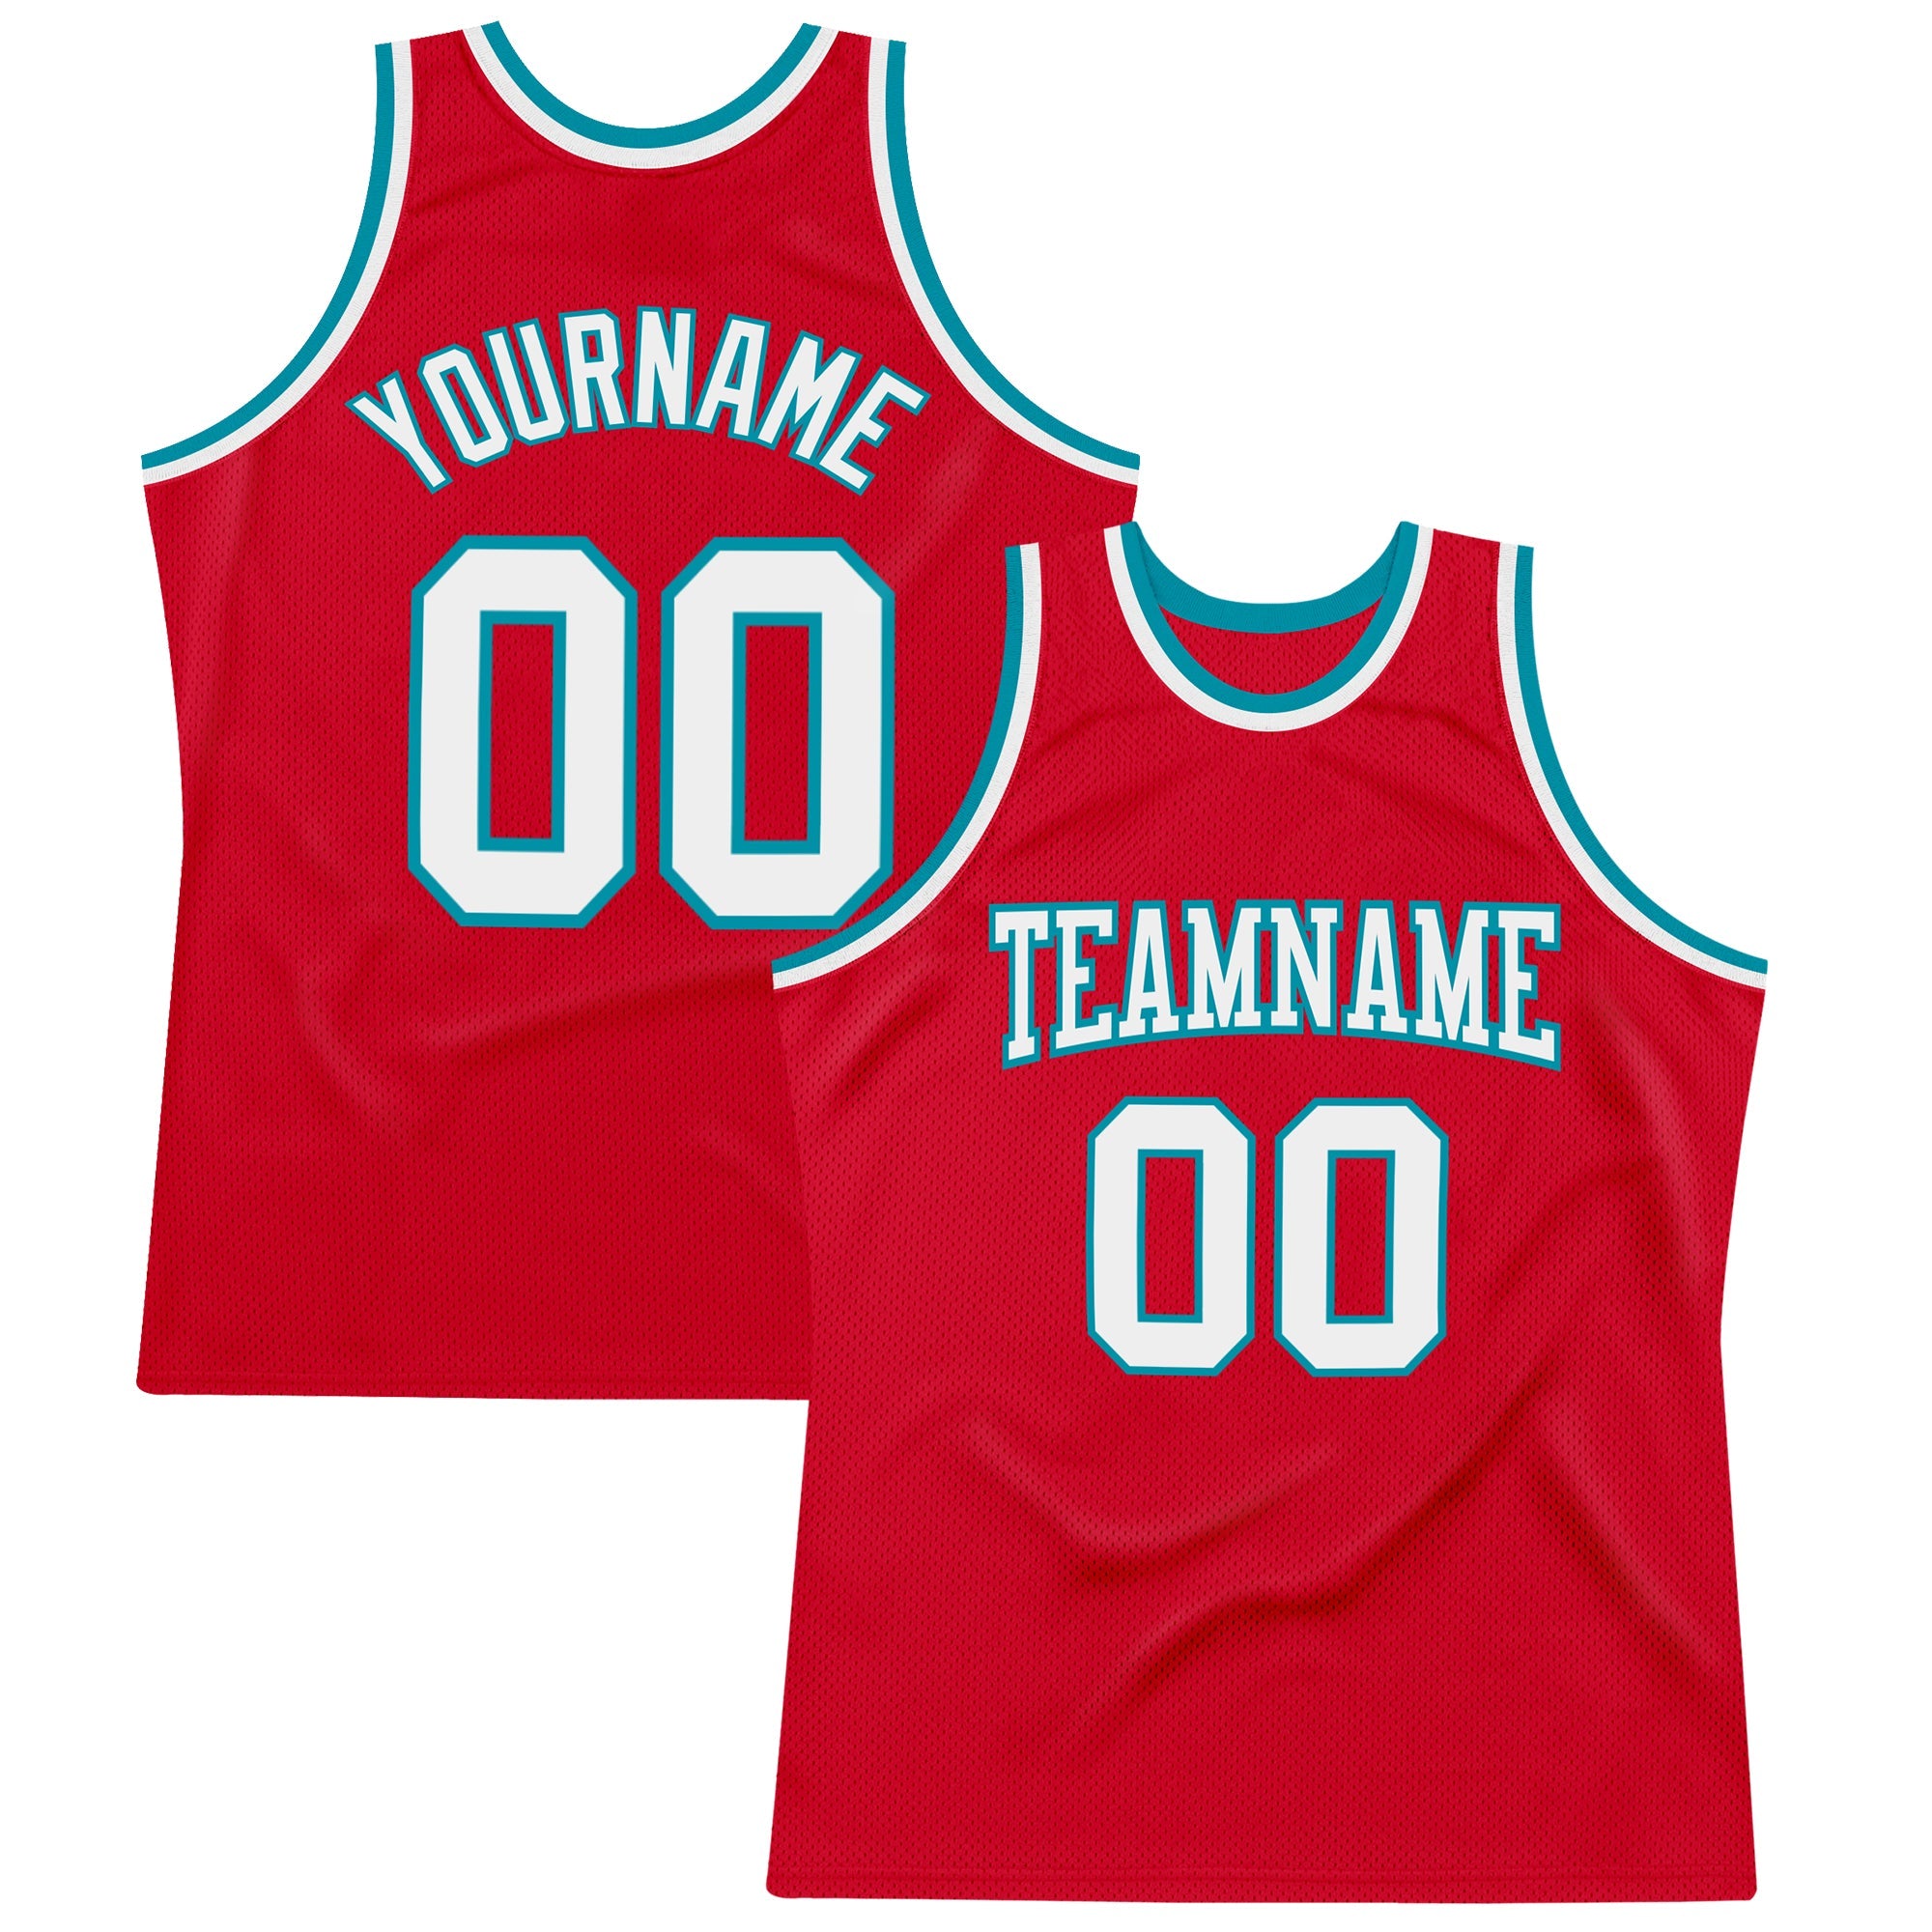 Custom Red White-Teal Authentic Throwback Basketball Jersey